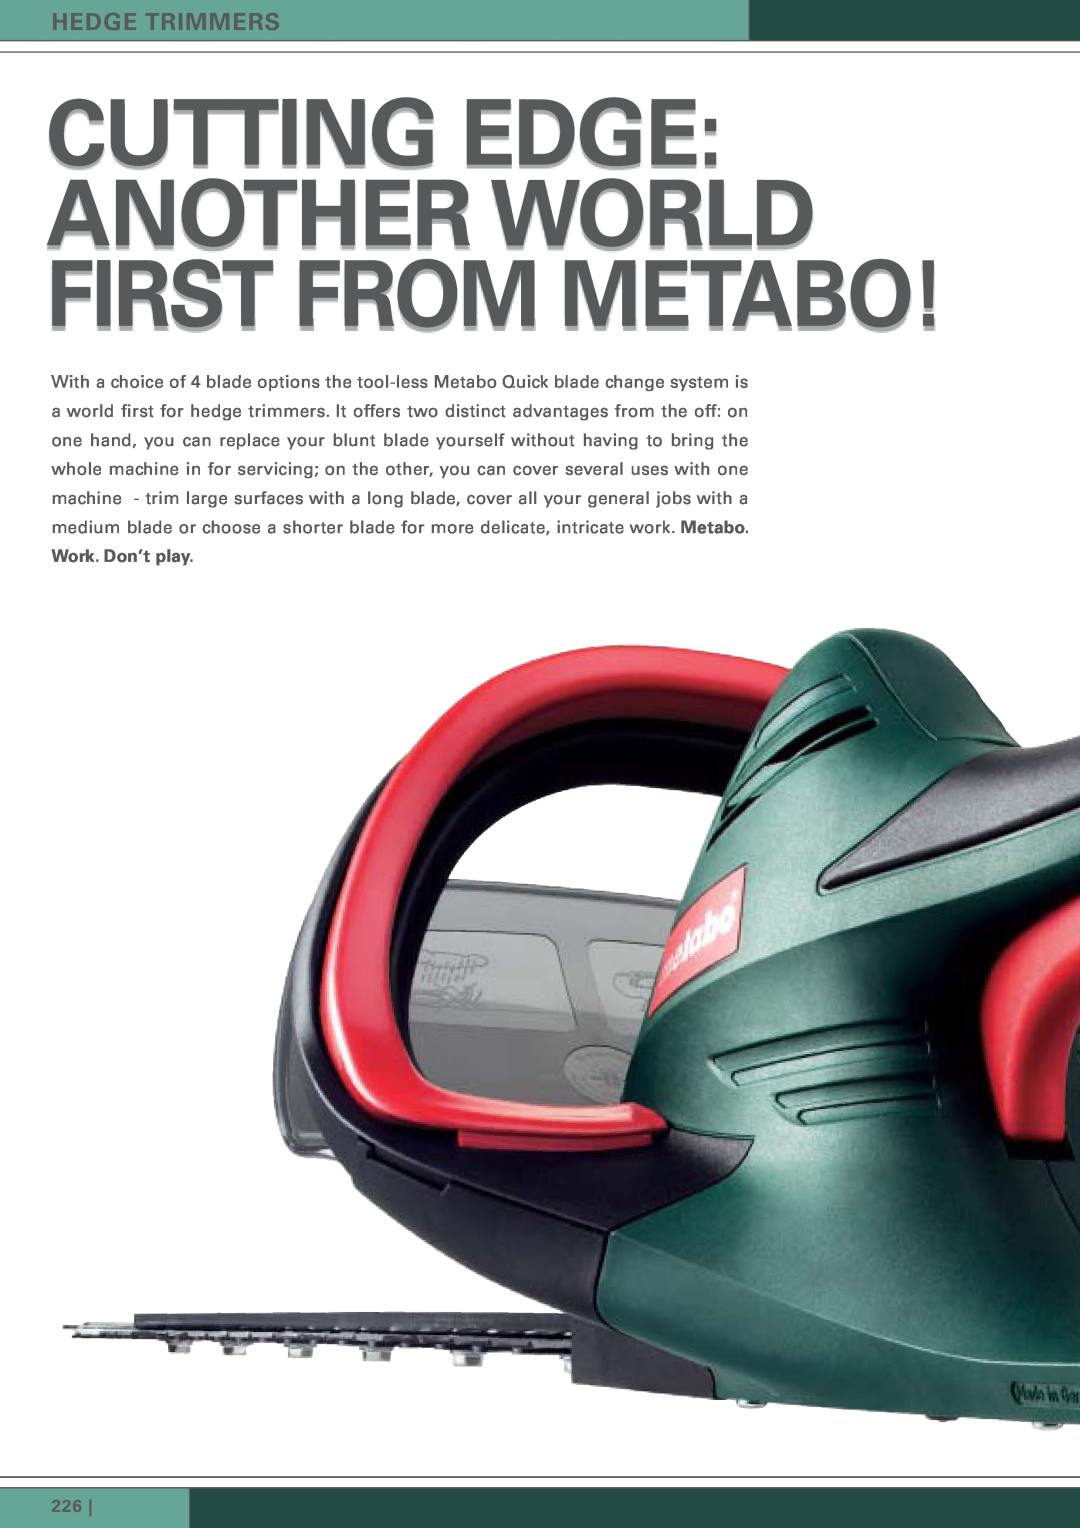 Metabo HS-8675 Quick, HS-8655 Quick manual Hedge Trimmers, Work. Don’t play, Cutting Edge Another World First From Metabo 